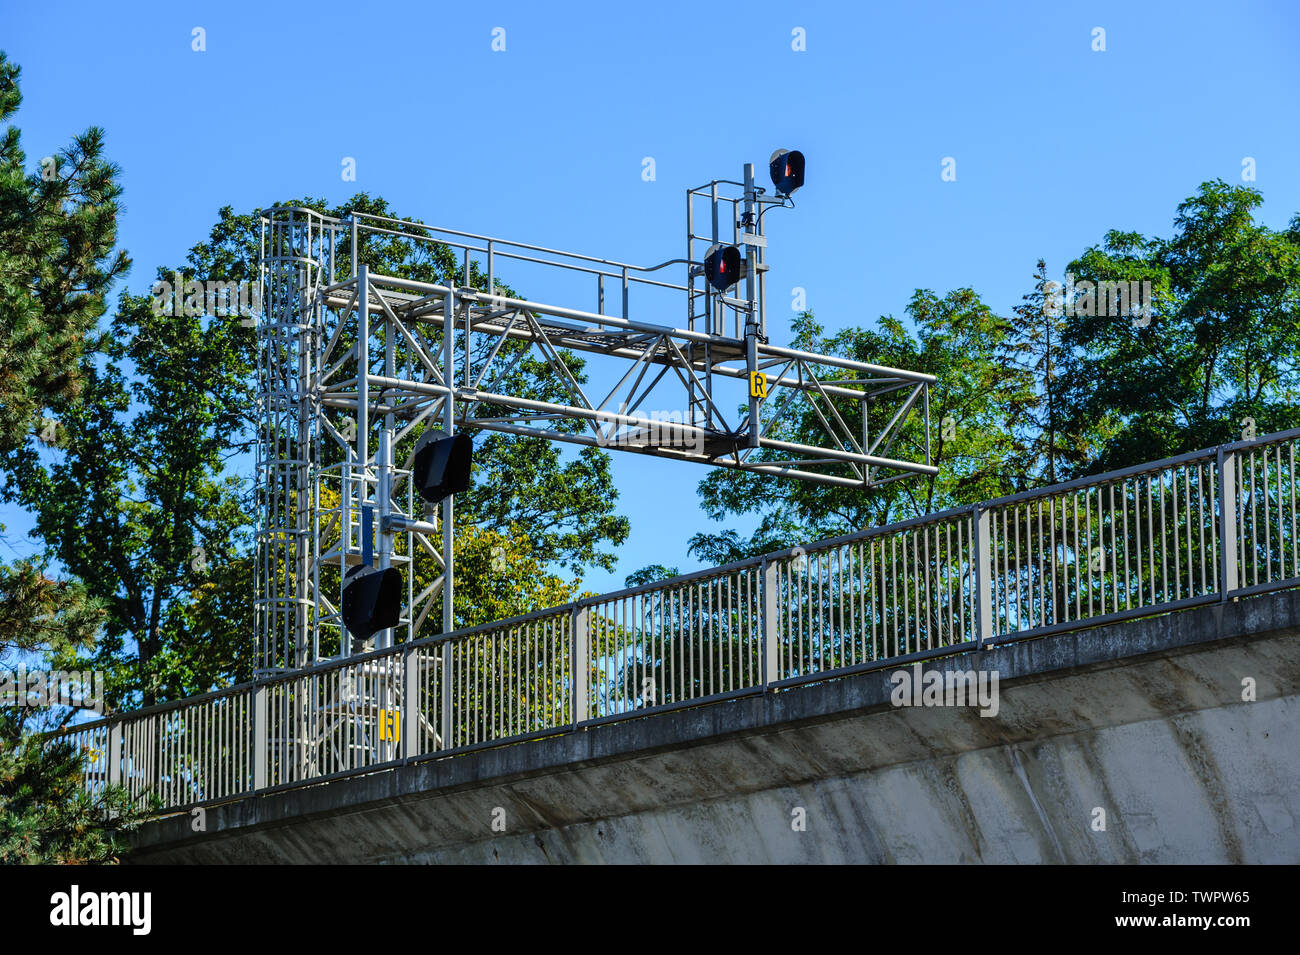 Railway signals and signs on metal frame among trees above bridge with fence. Stock Photo